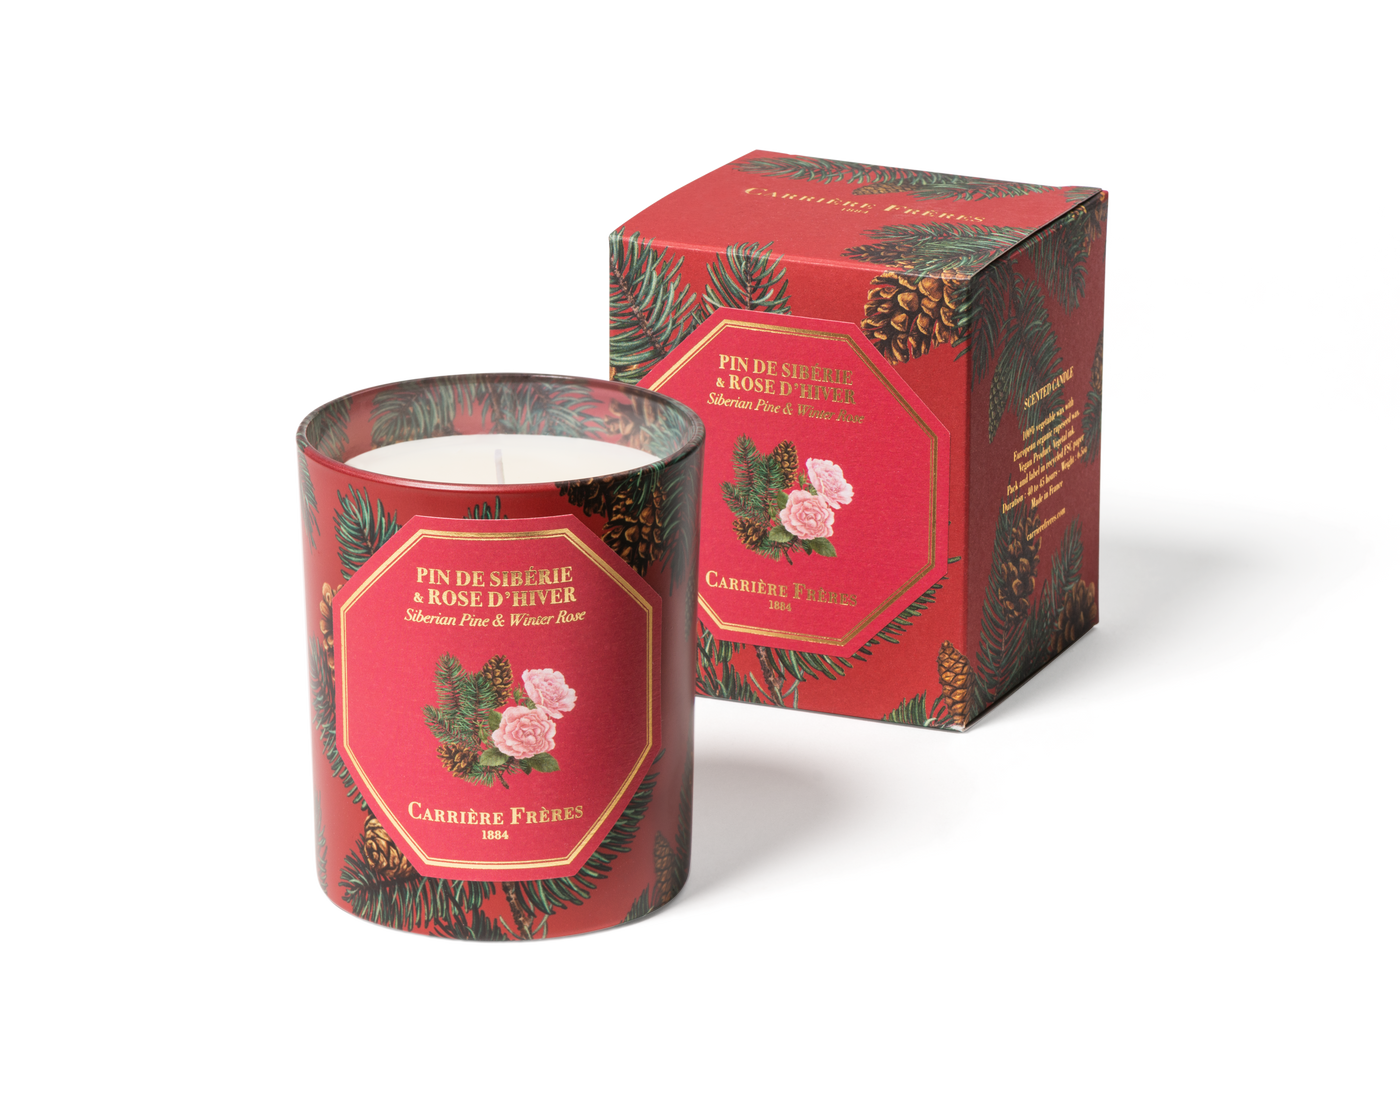 CARRIERE FRERES Pine & Winter Rose Candle